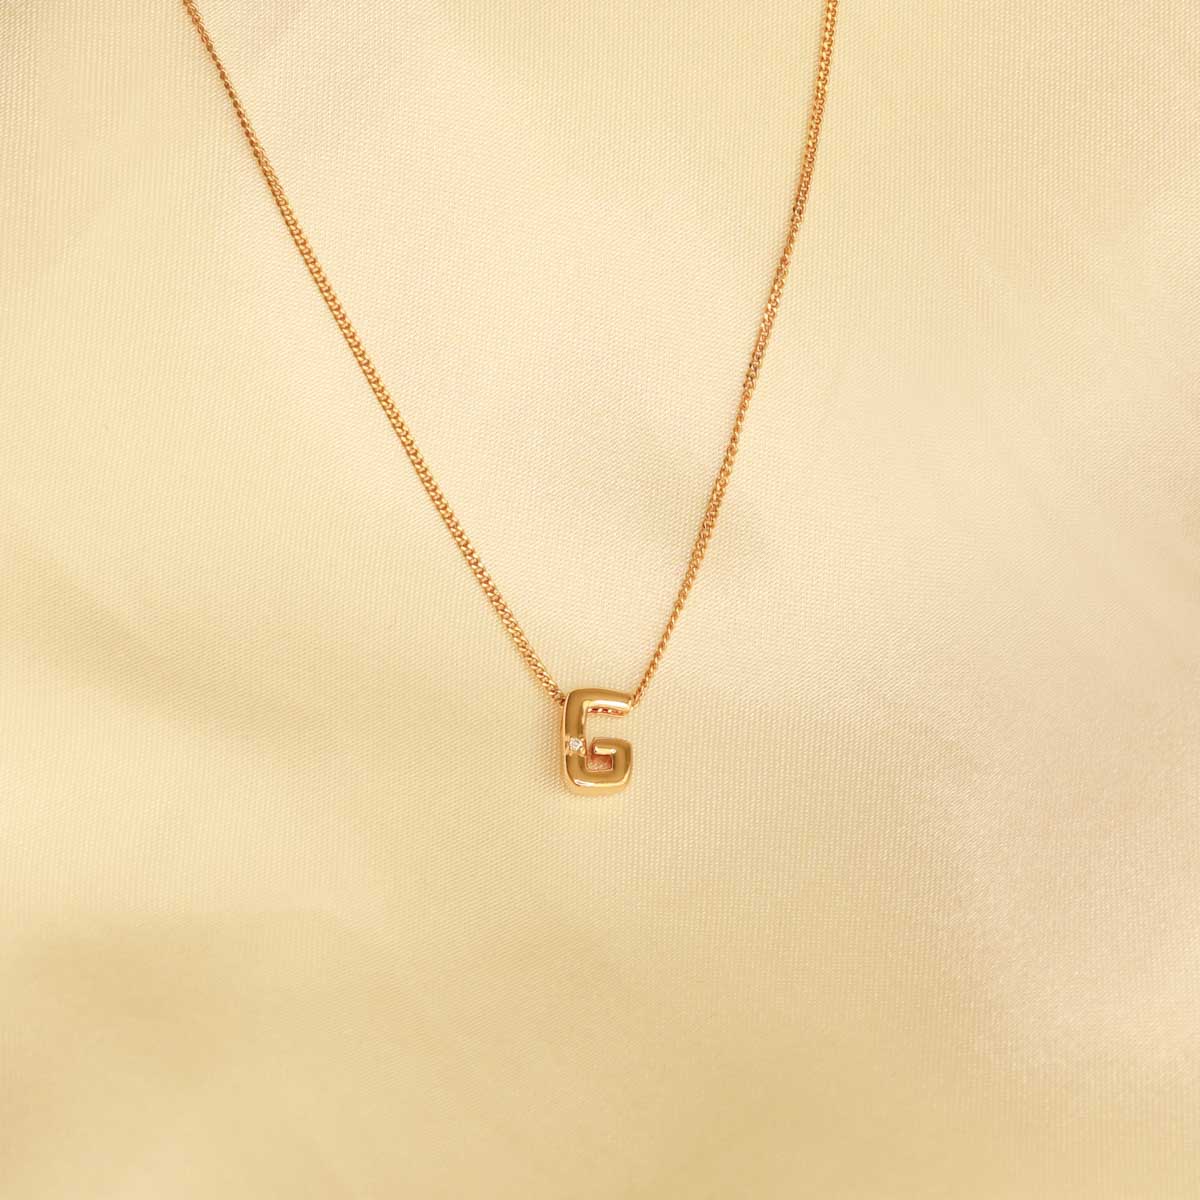 Flat lay shot of G Initial Pendant Necklace in Gold